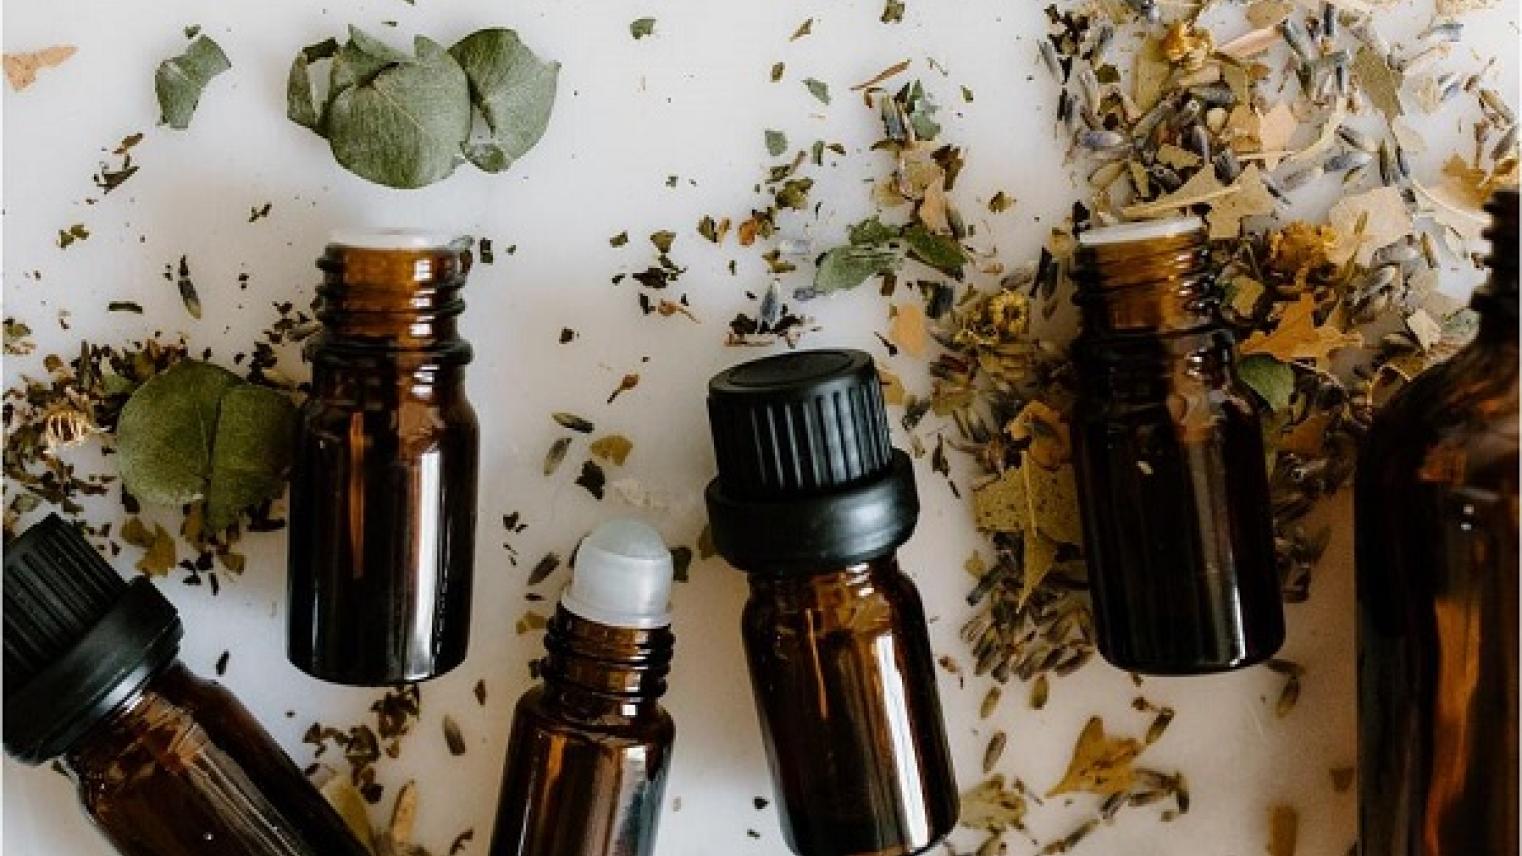 Image of eucalyptus leaves and other botanicals with medicinal dropper bottles by Tara Winstead from https://www.pexels.com/photo/essential-oil-bottles-and-herbal-medicine-on-white-surface-6694188/